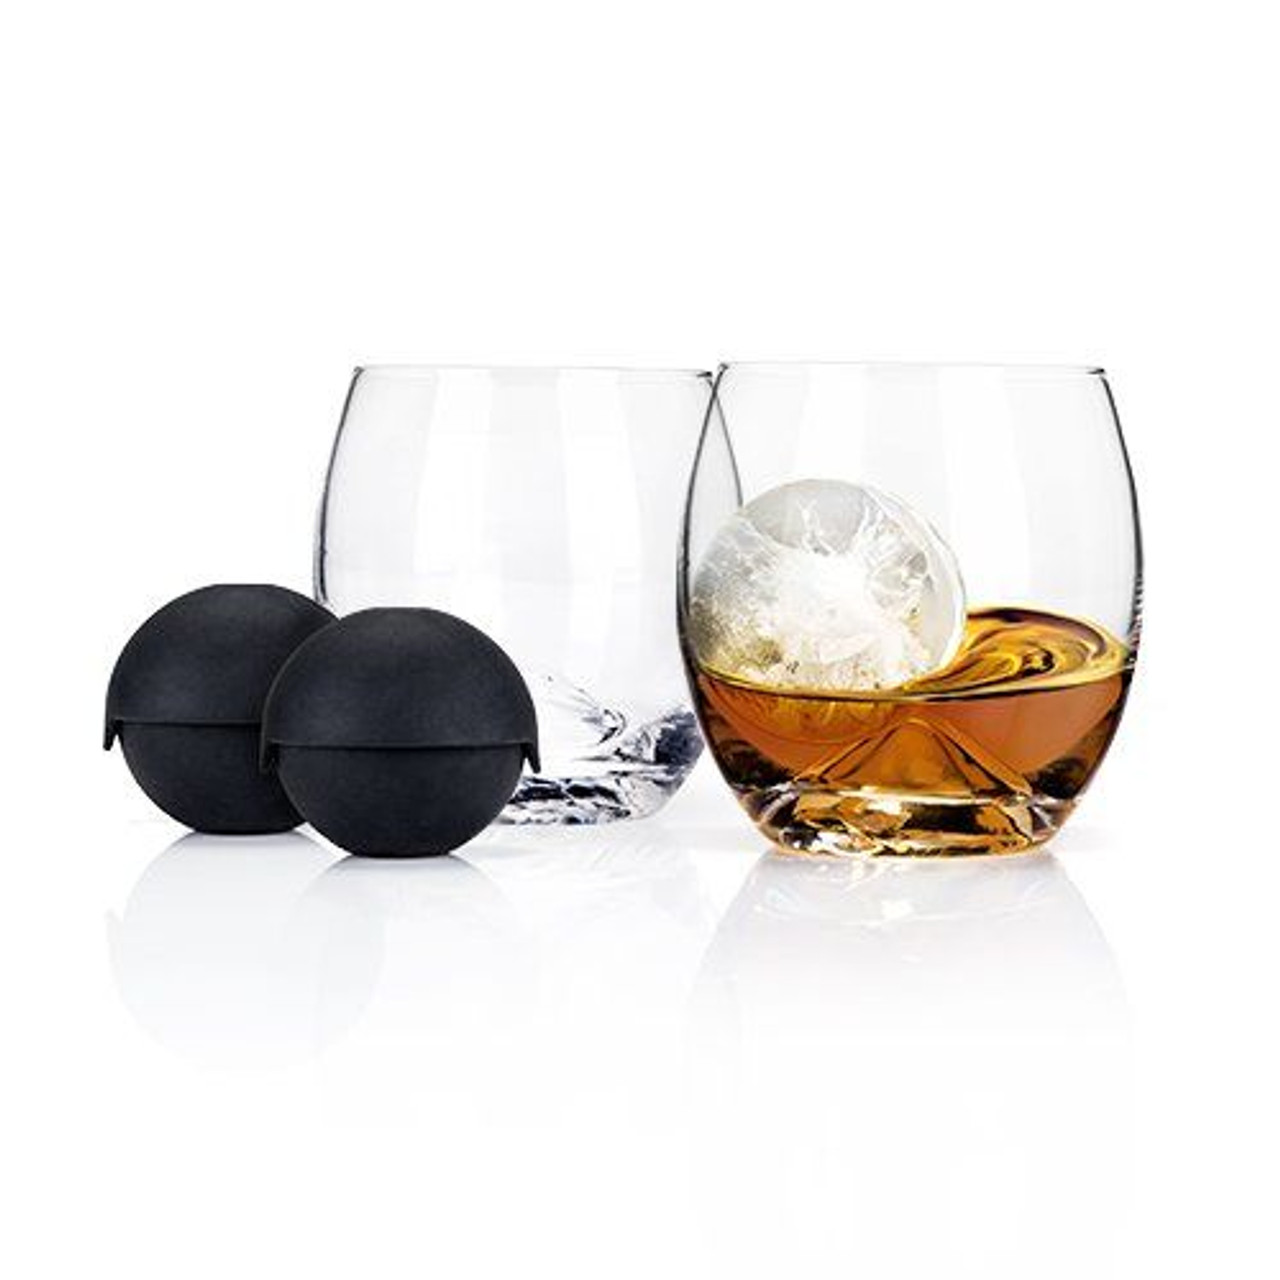 Golf Ball Ice Mold Whiskey Scotch - Set of 3 Brand new In Box